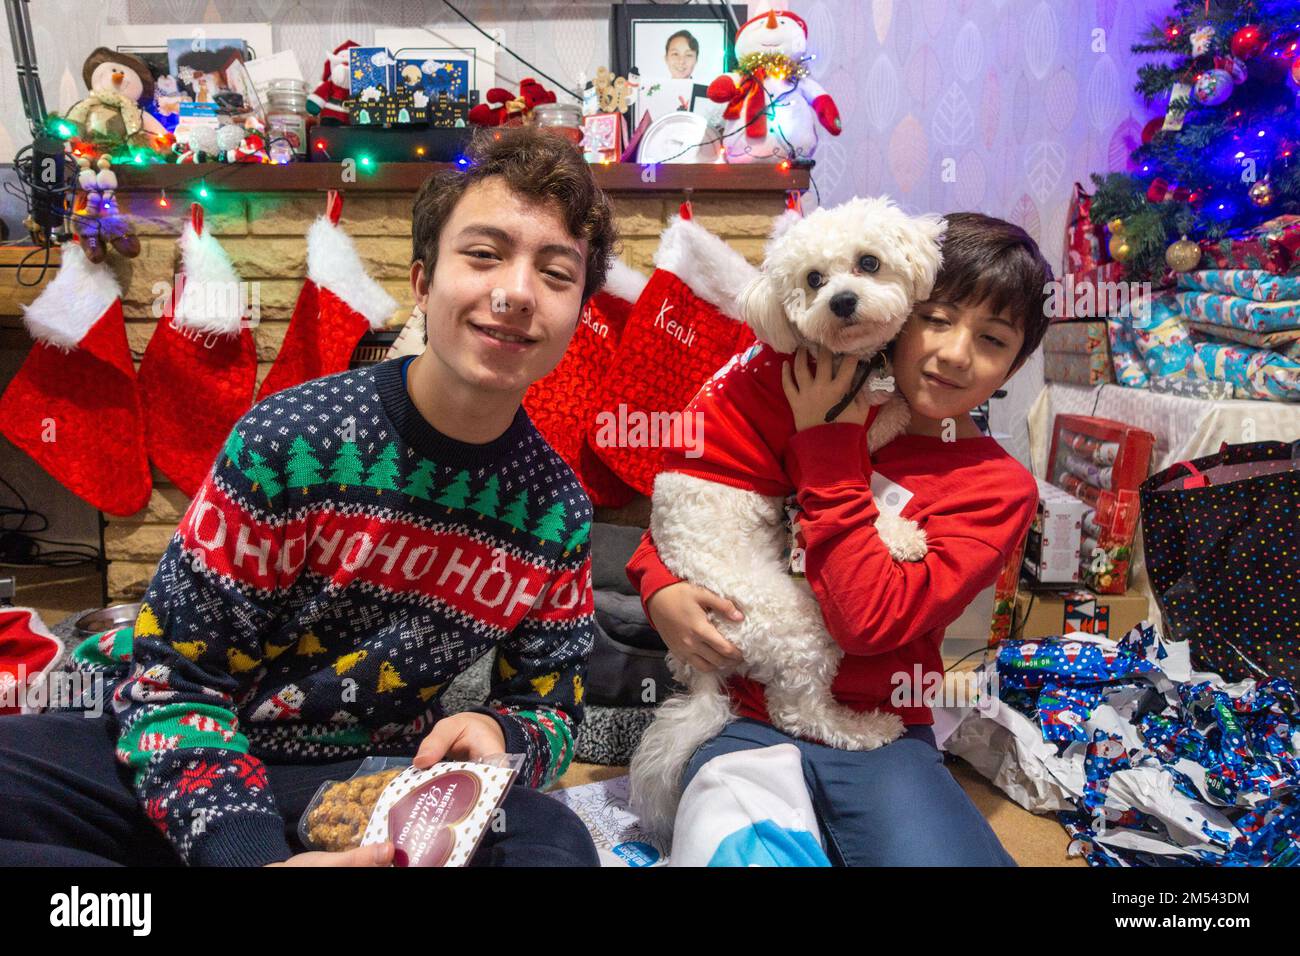 Brothers pose for a portrait with their small, white cavapoo dog on Christmas Day Stock Photo